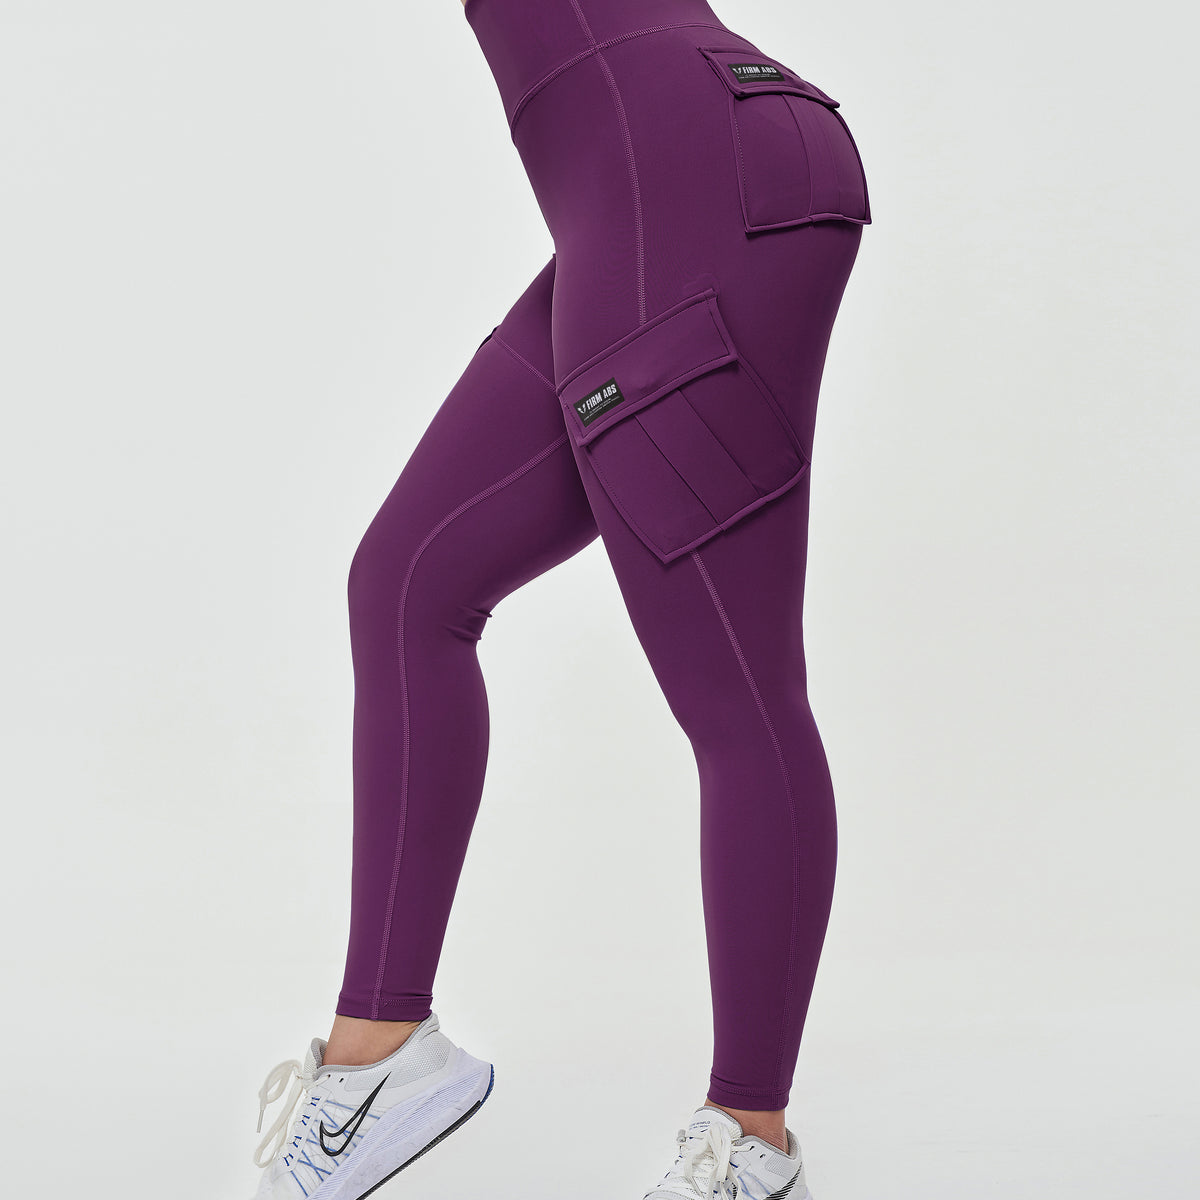 What To Wear With Gym Leggings? – solowomen